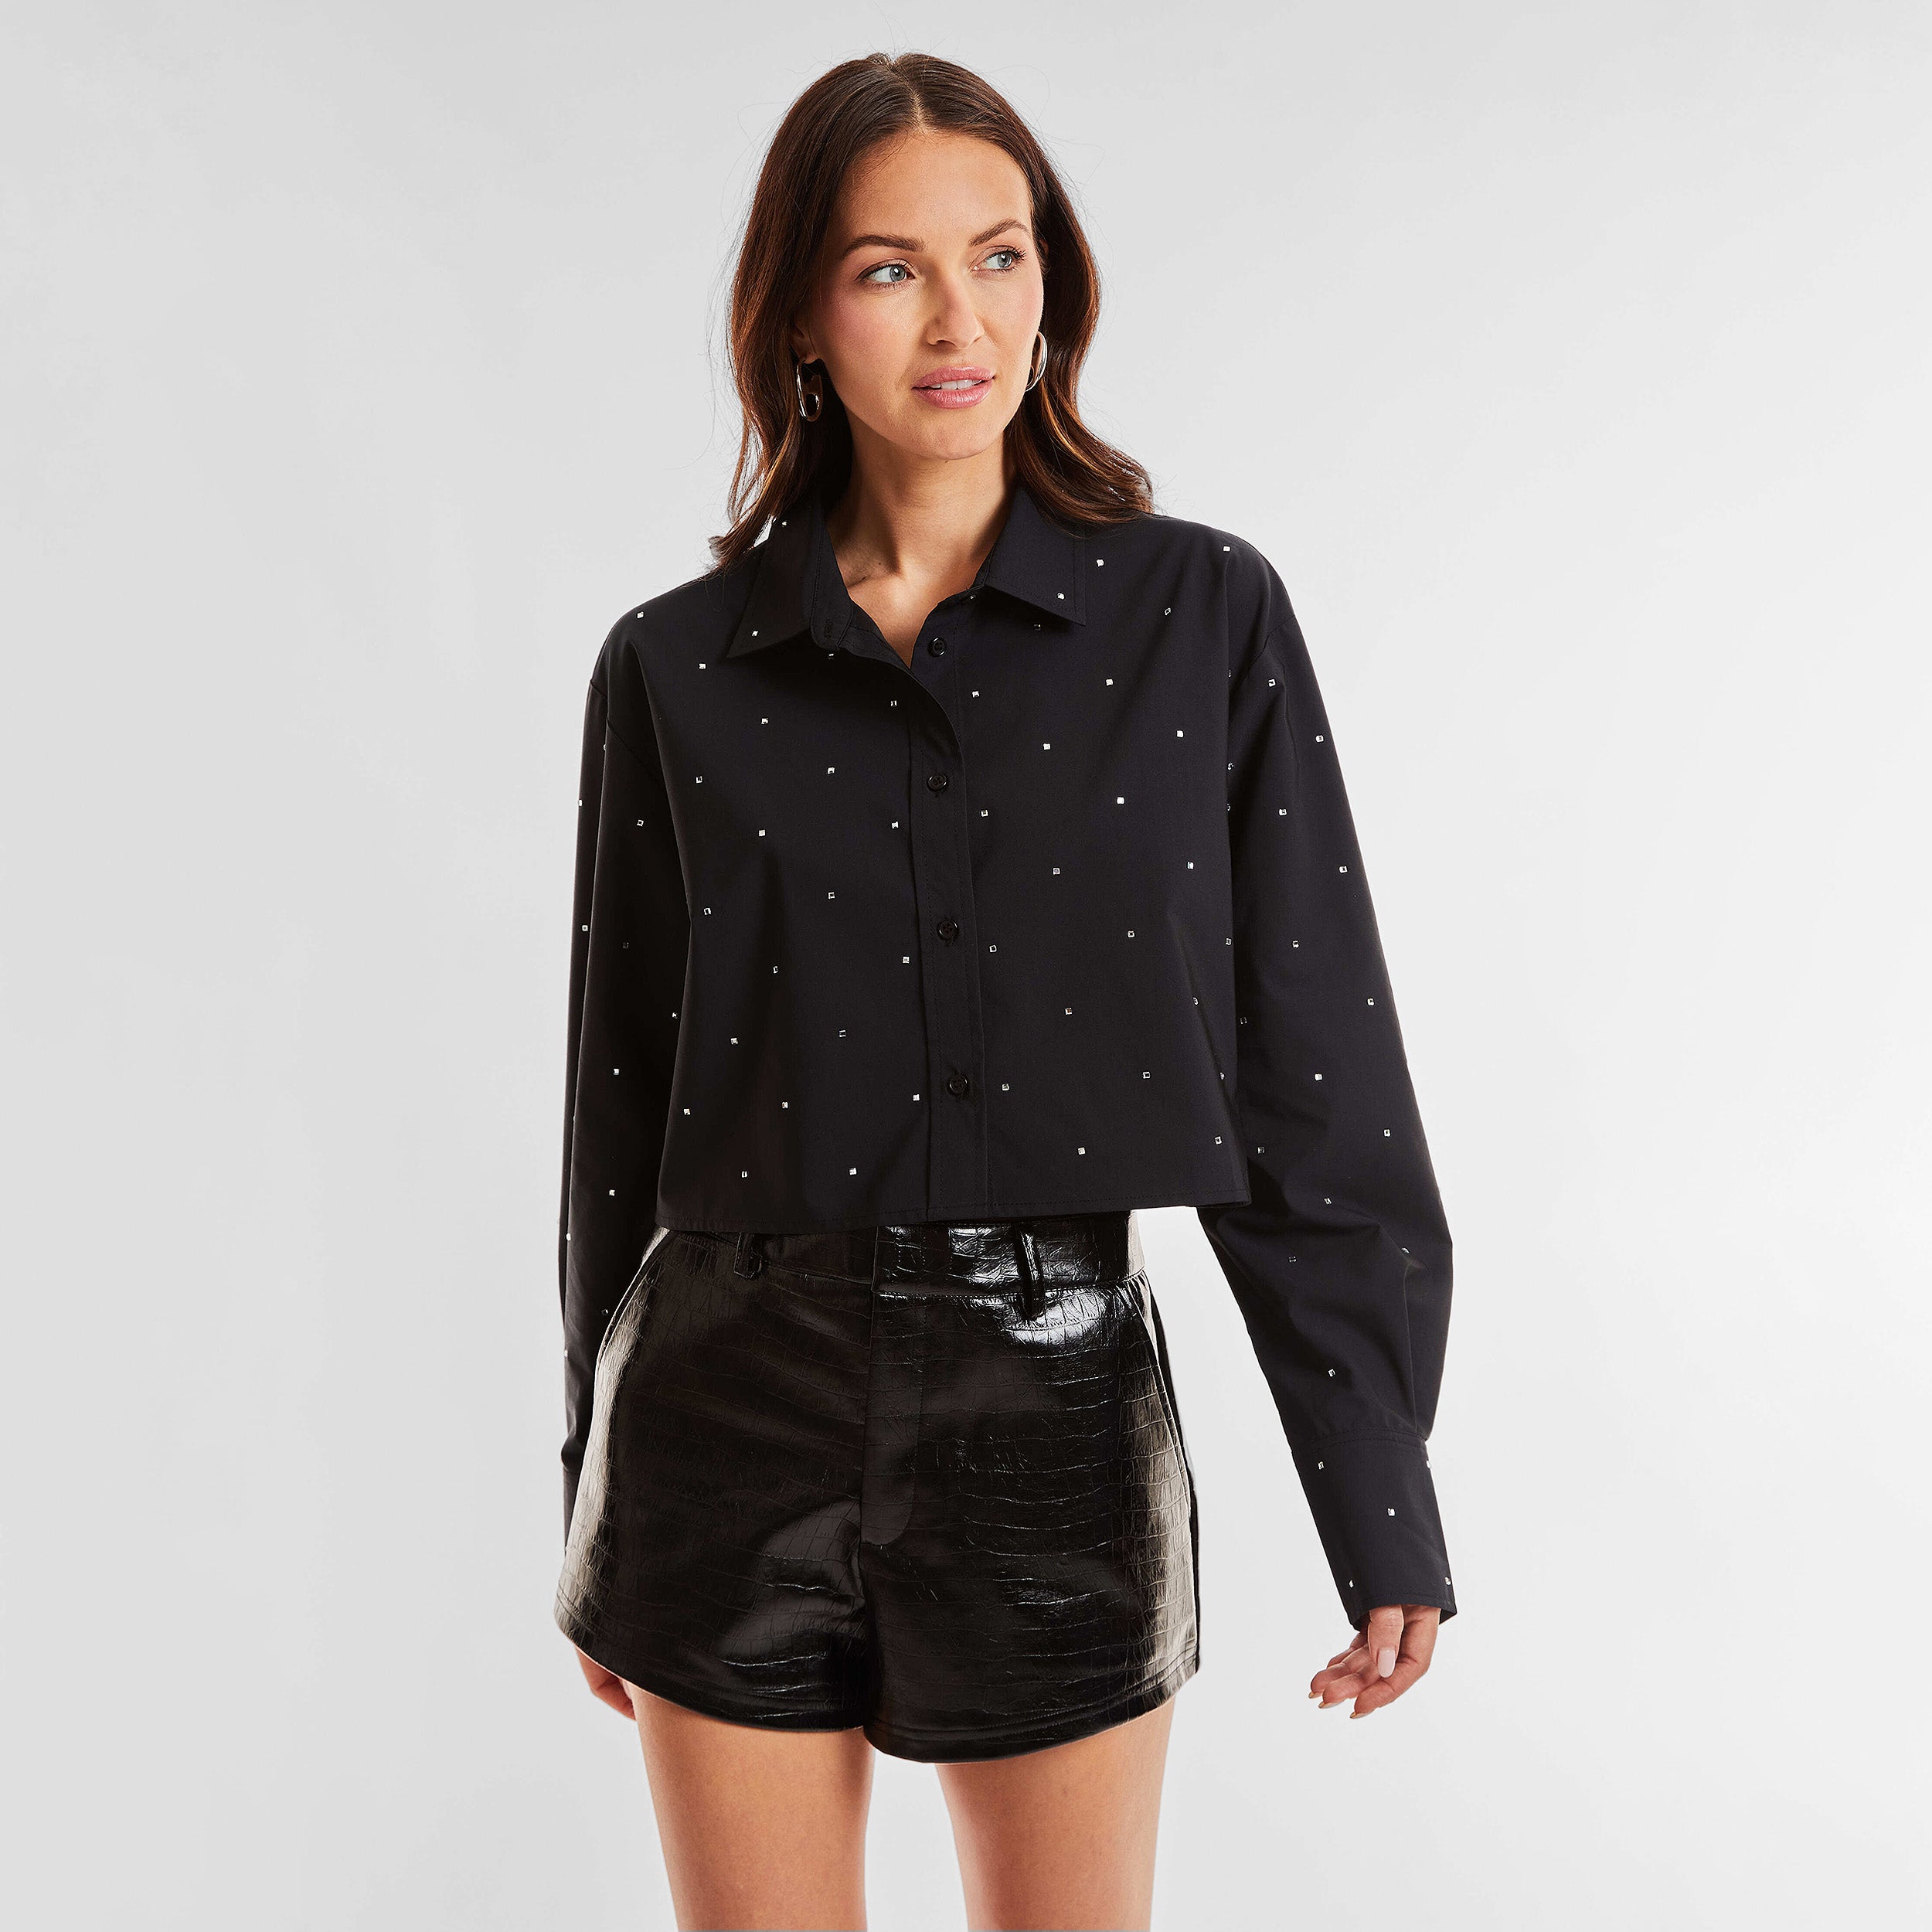 Front view of woman wearing a black cropped button down shirt with crystal embellishments and croco pattern embossed faux leather shorts.